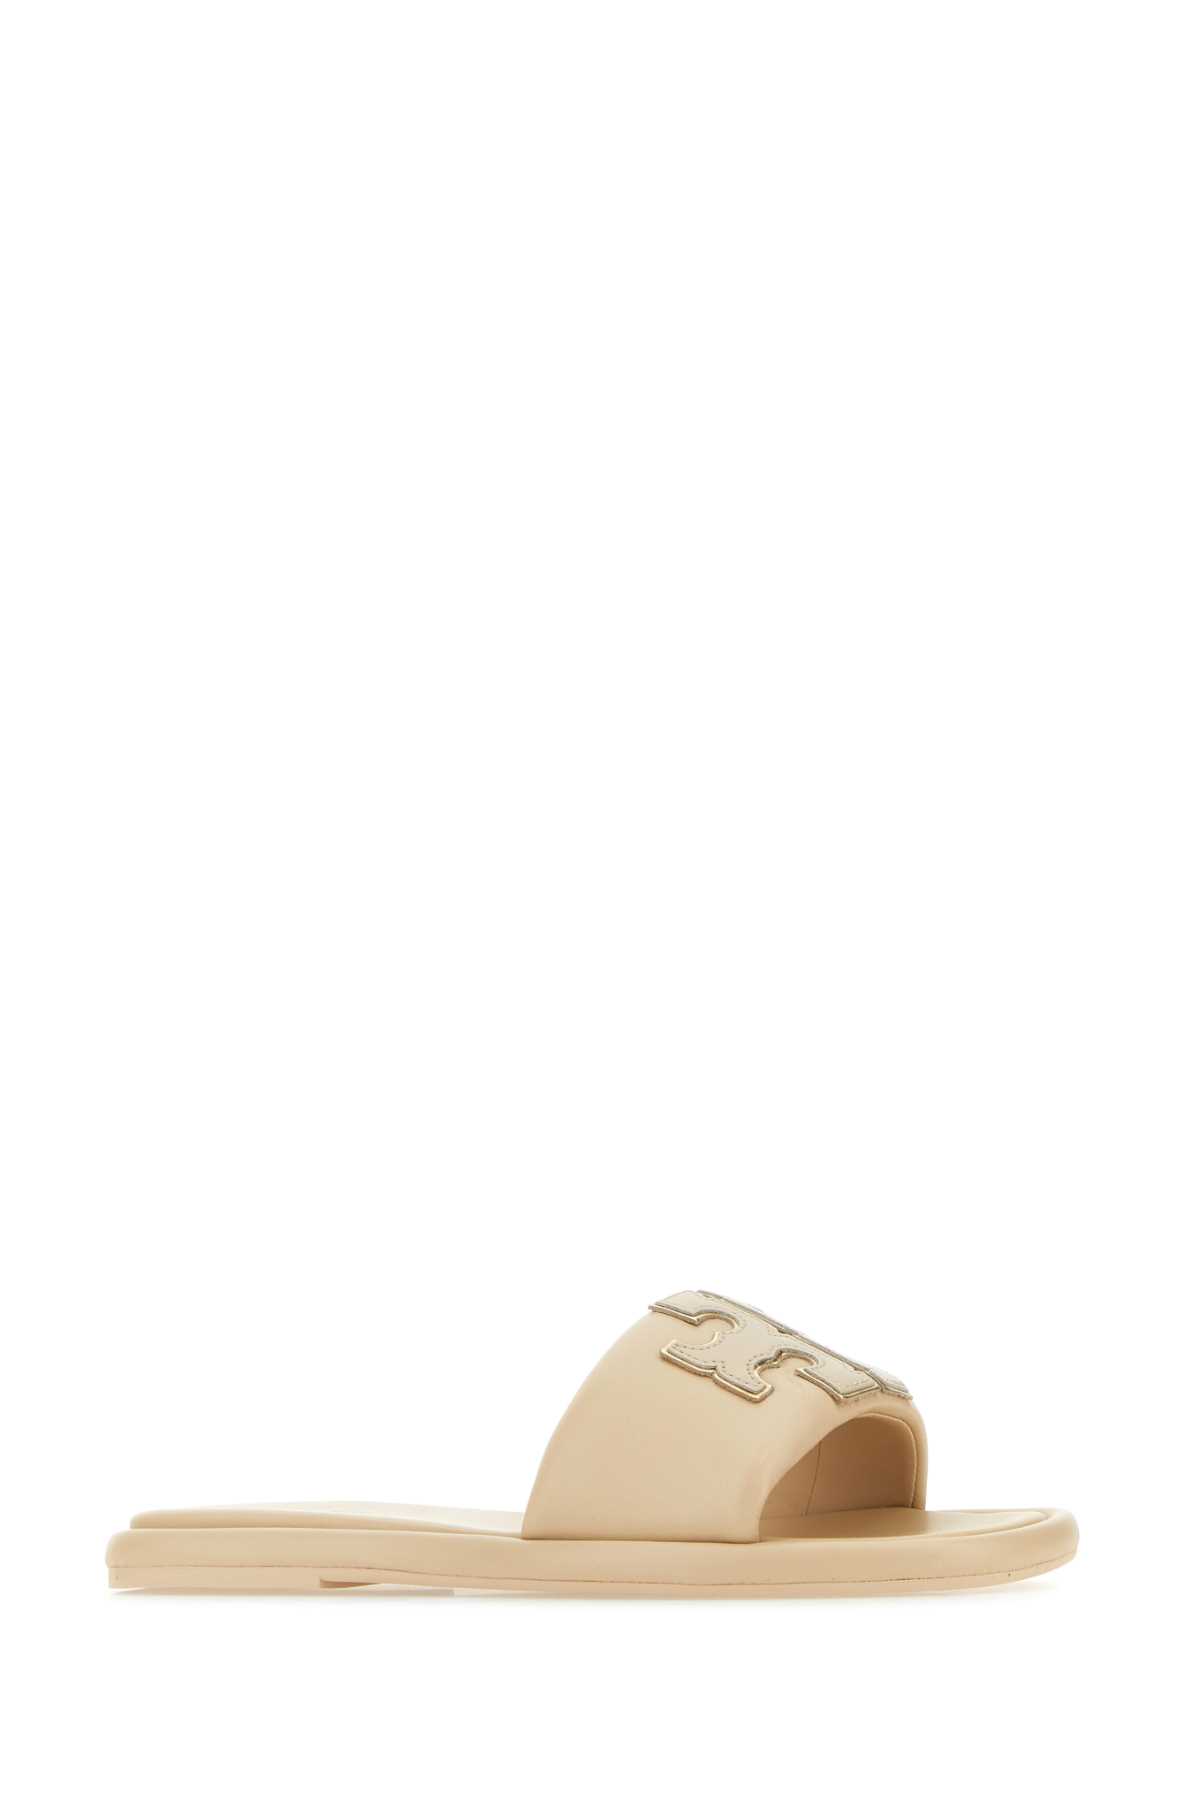 TORY BURCH SAND NAPPA LEATHER T SPORT SLIPPERS